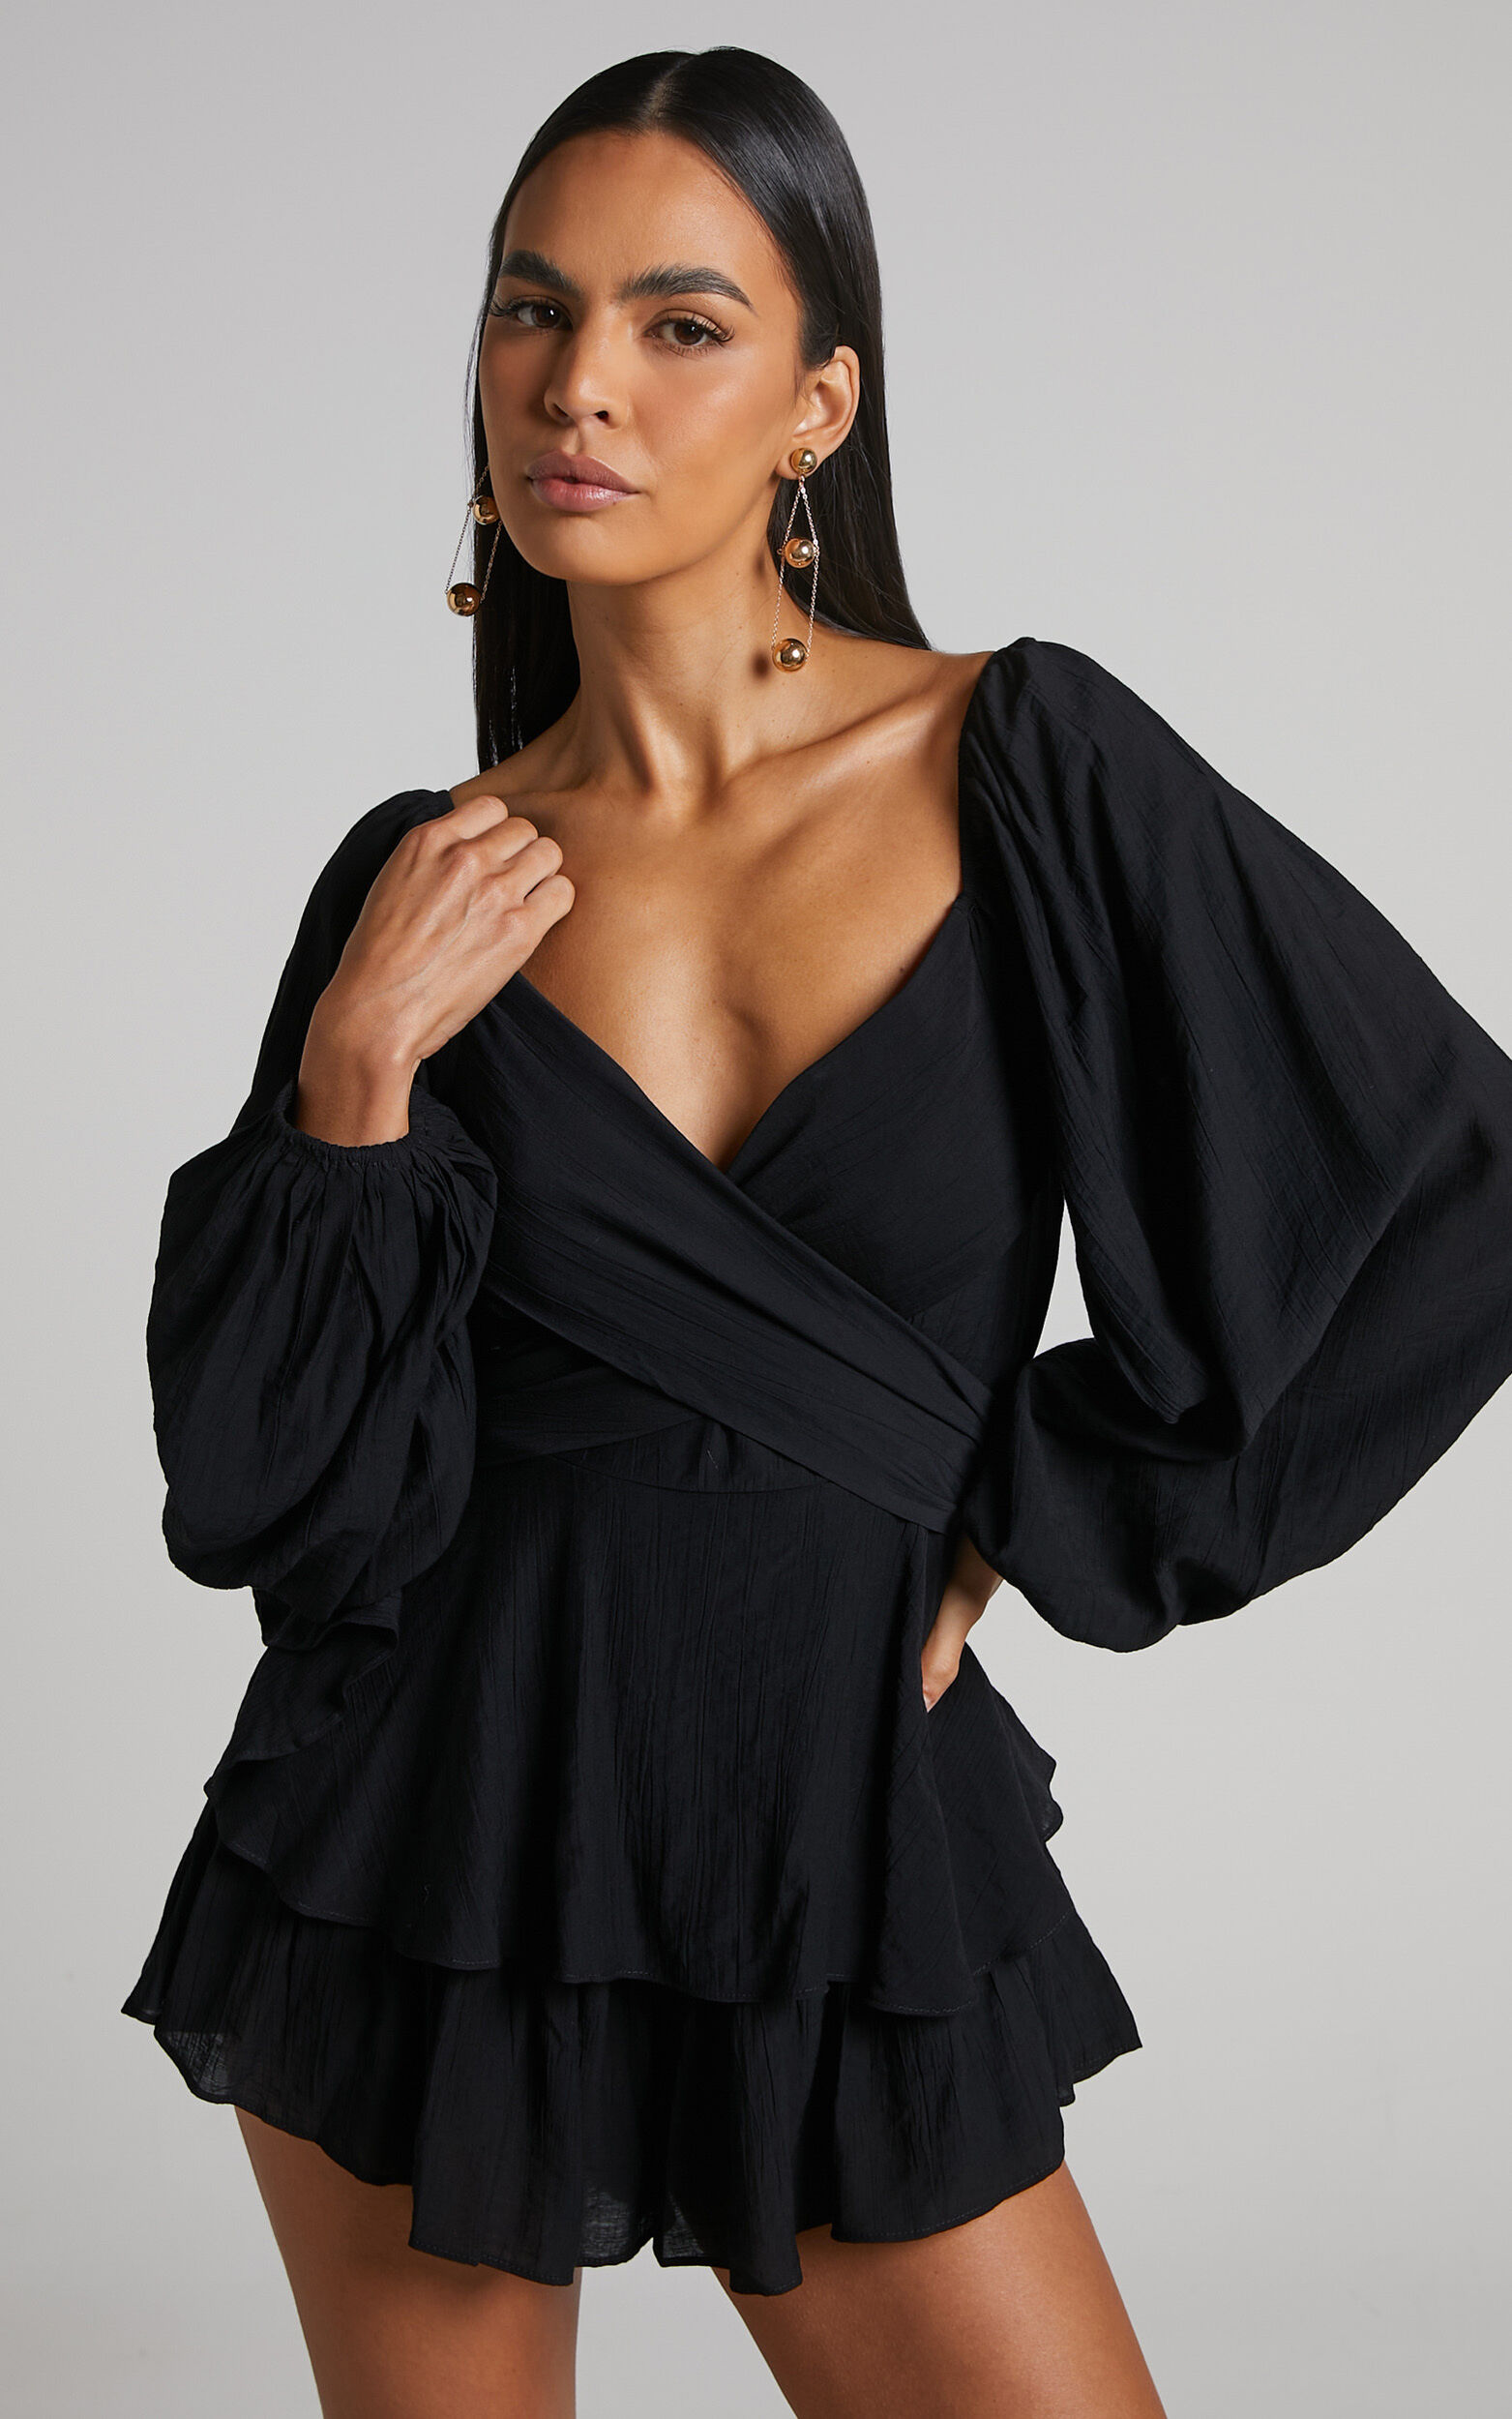 Florice Playsuit - Wrap Front Frill Playsuit in Black - 04, BLK4